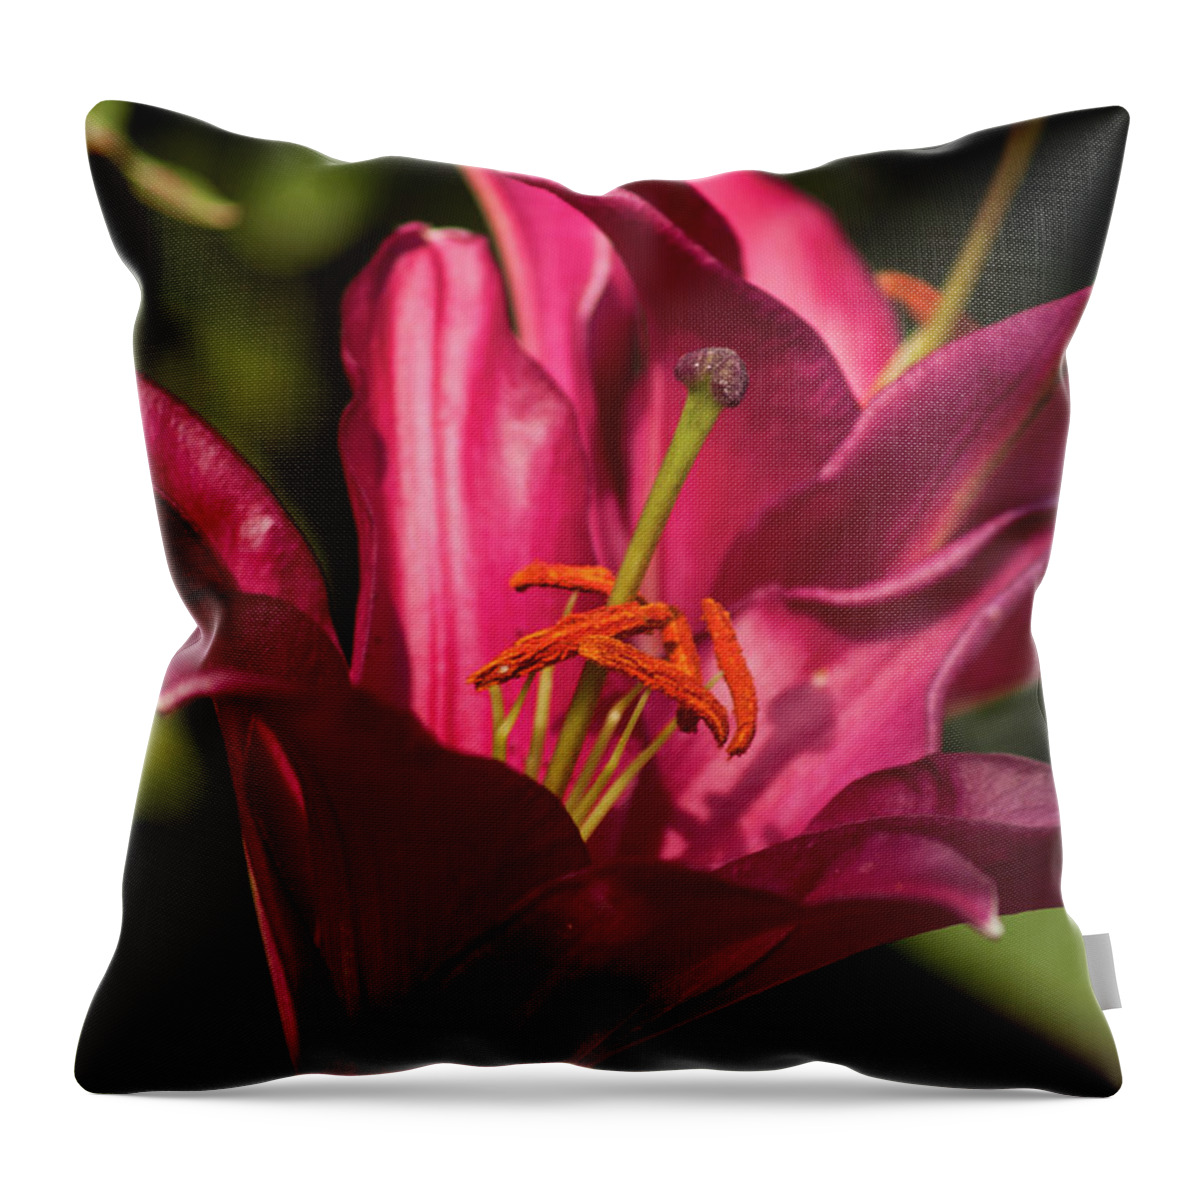 Floral Throw Pillow featuring the photograph Spotlight by Stewart Helberg